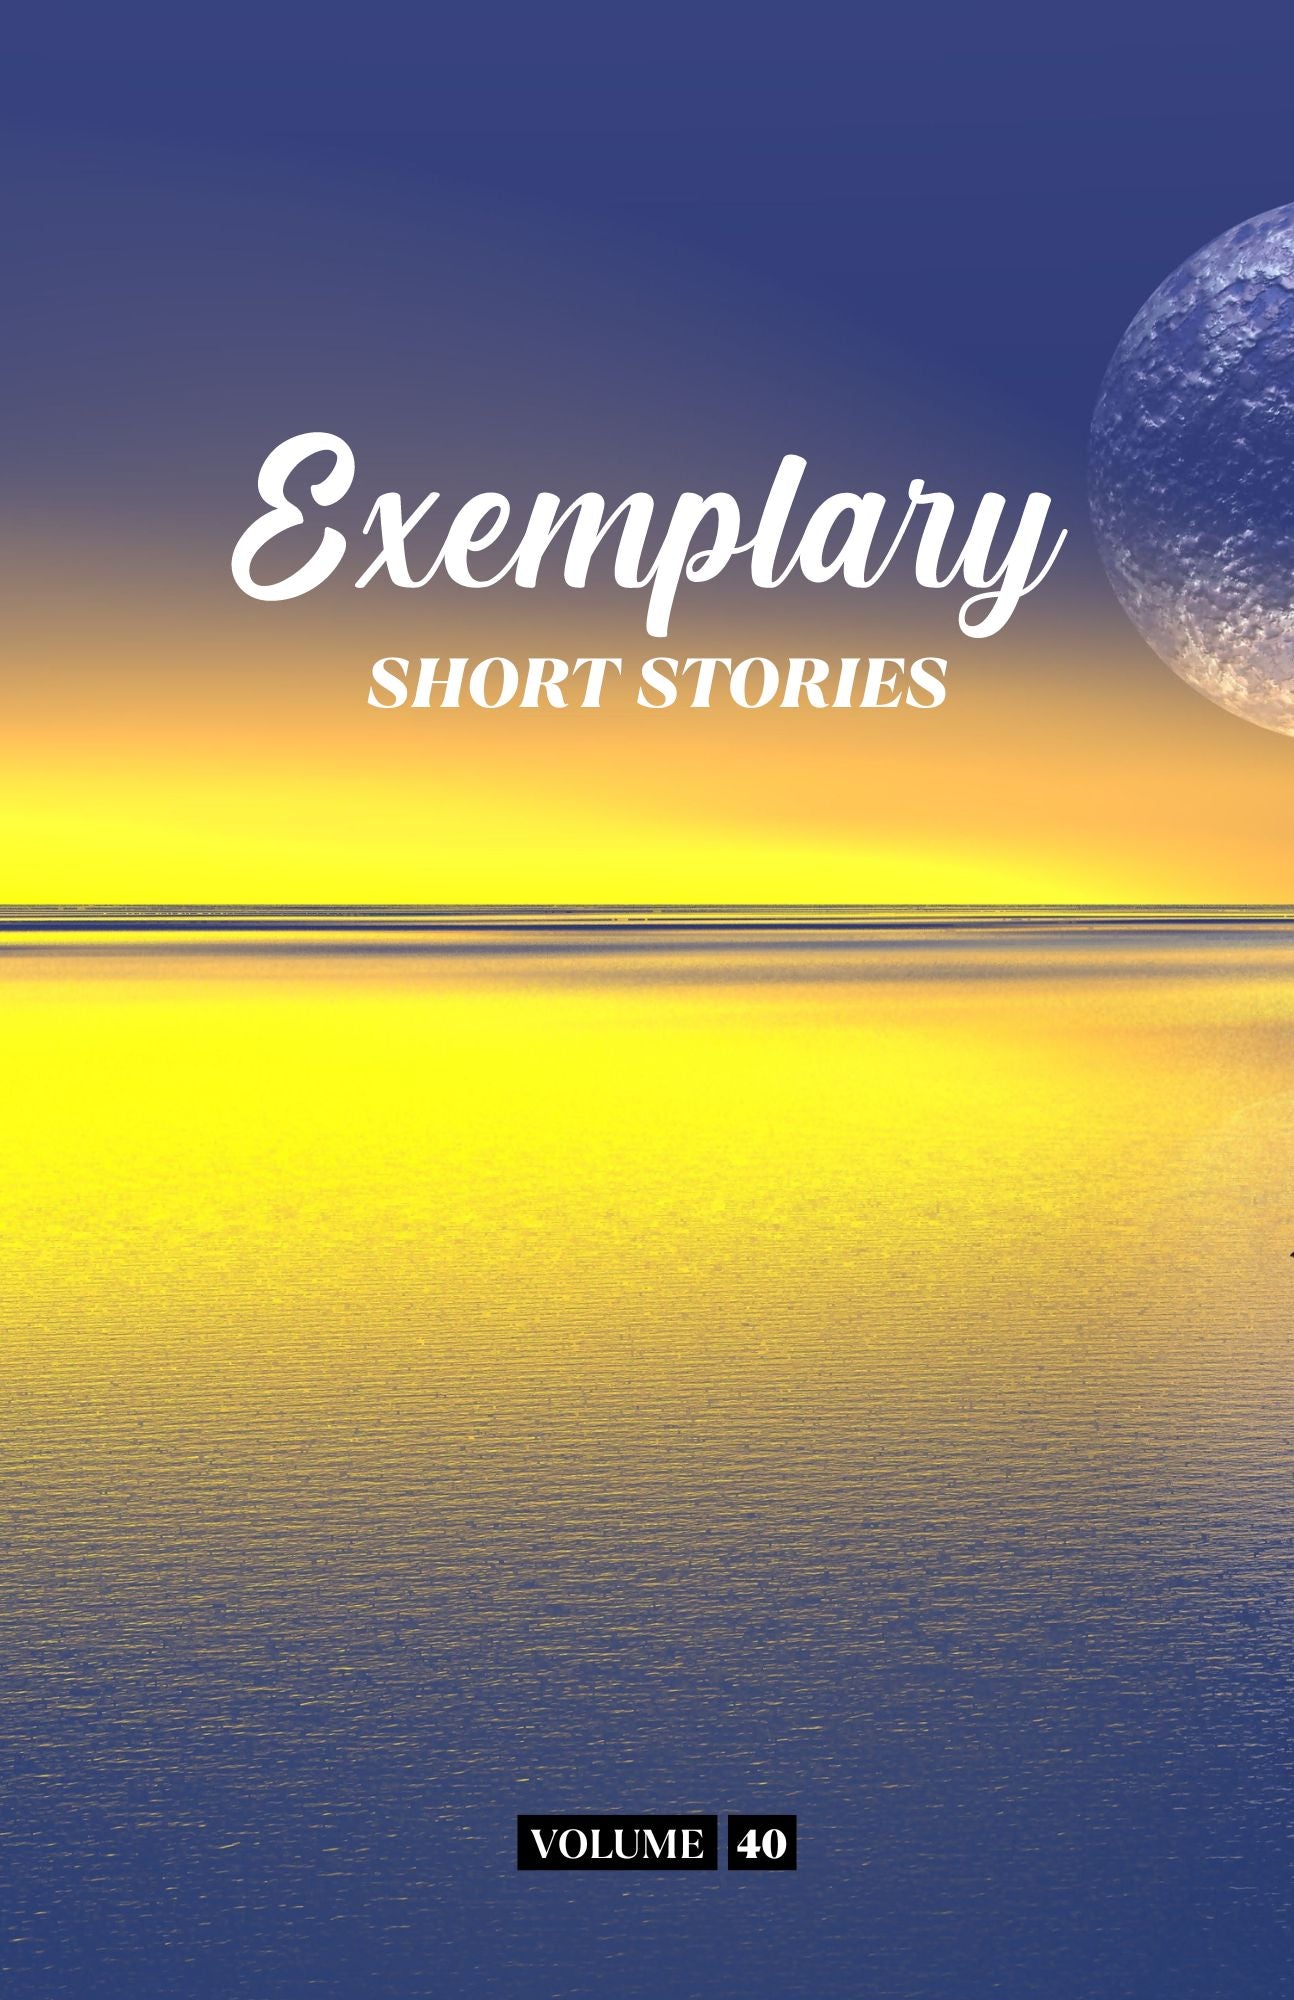 Exemplary Short Stories Volume 40 (Physical Book Pre-Order)